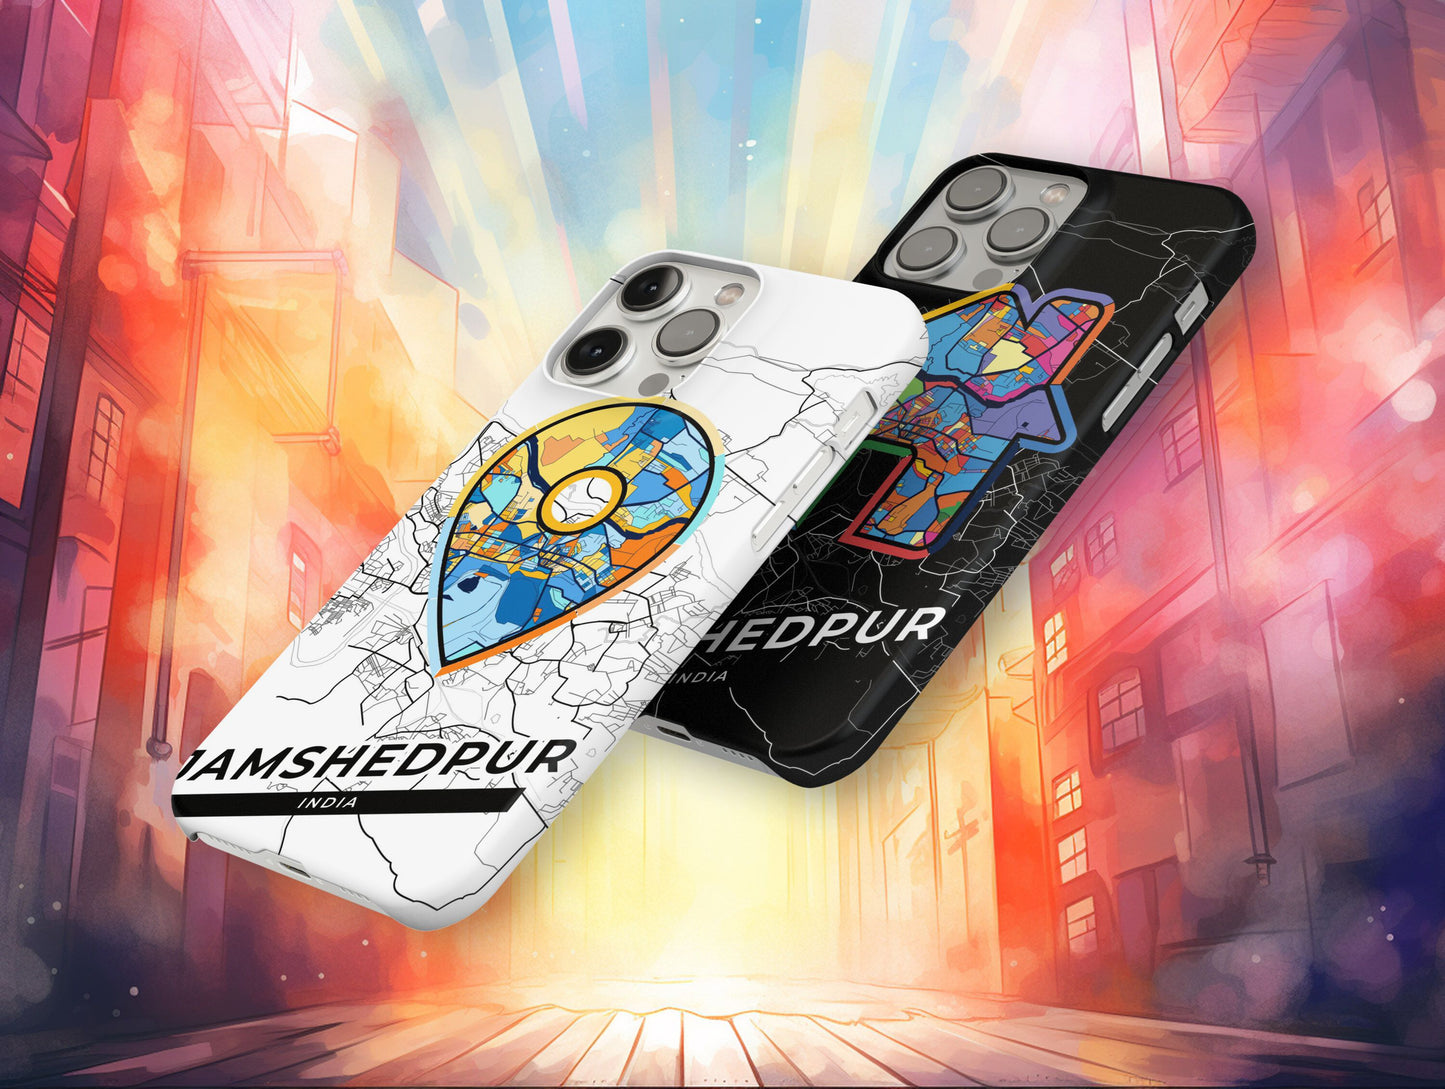 Jamshedpur India slim phone case with colorful icon. Birthday, wedding or housewarming gift. Couple match cases.